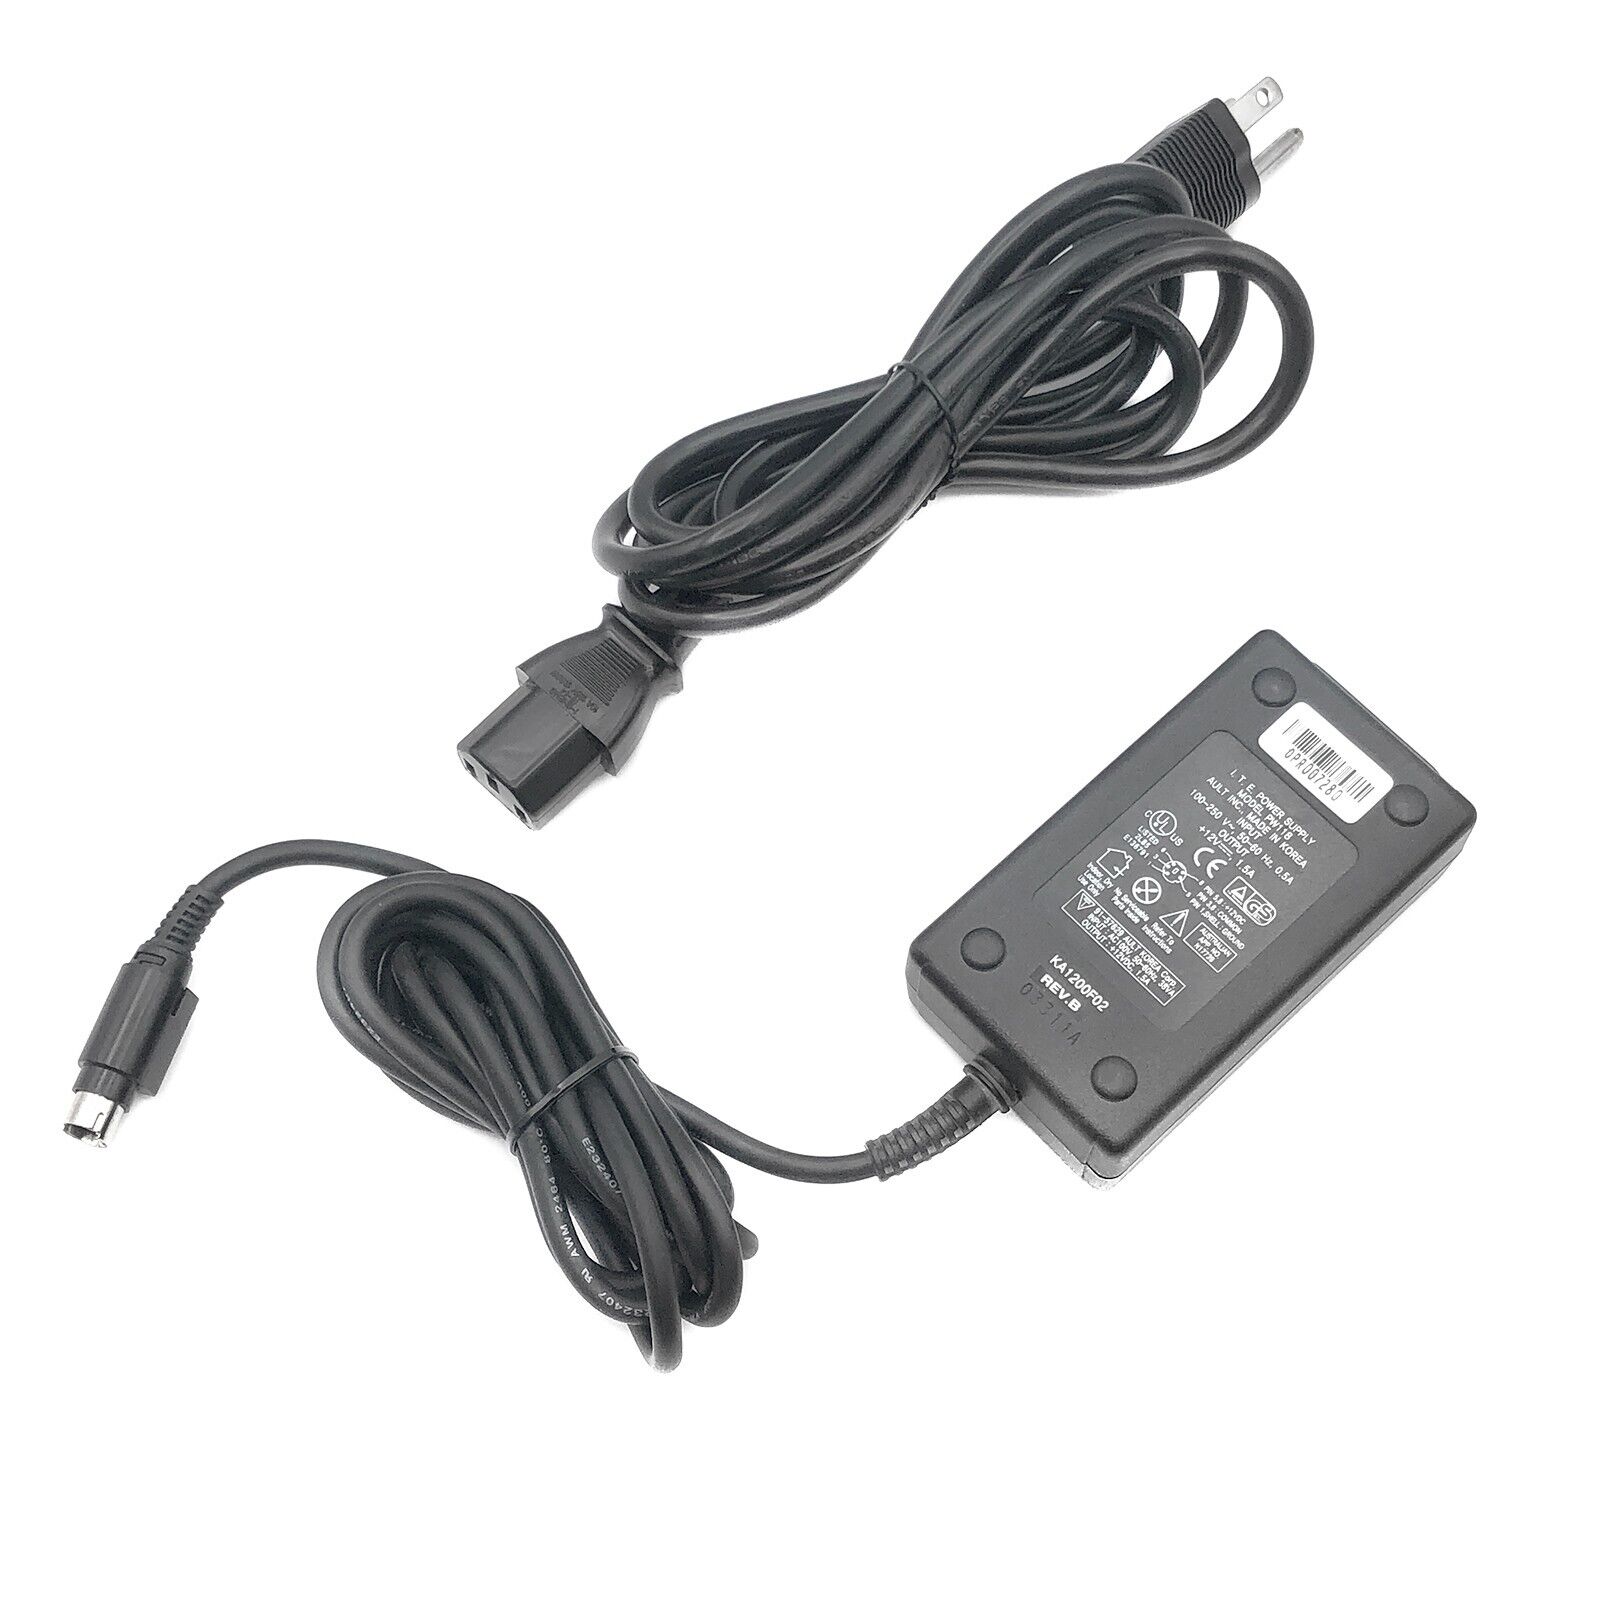 *Brand NEW*Genuine Ault PW118 12V 1.5A AC Adapter 5-Pin Power Supply